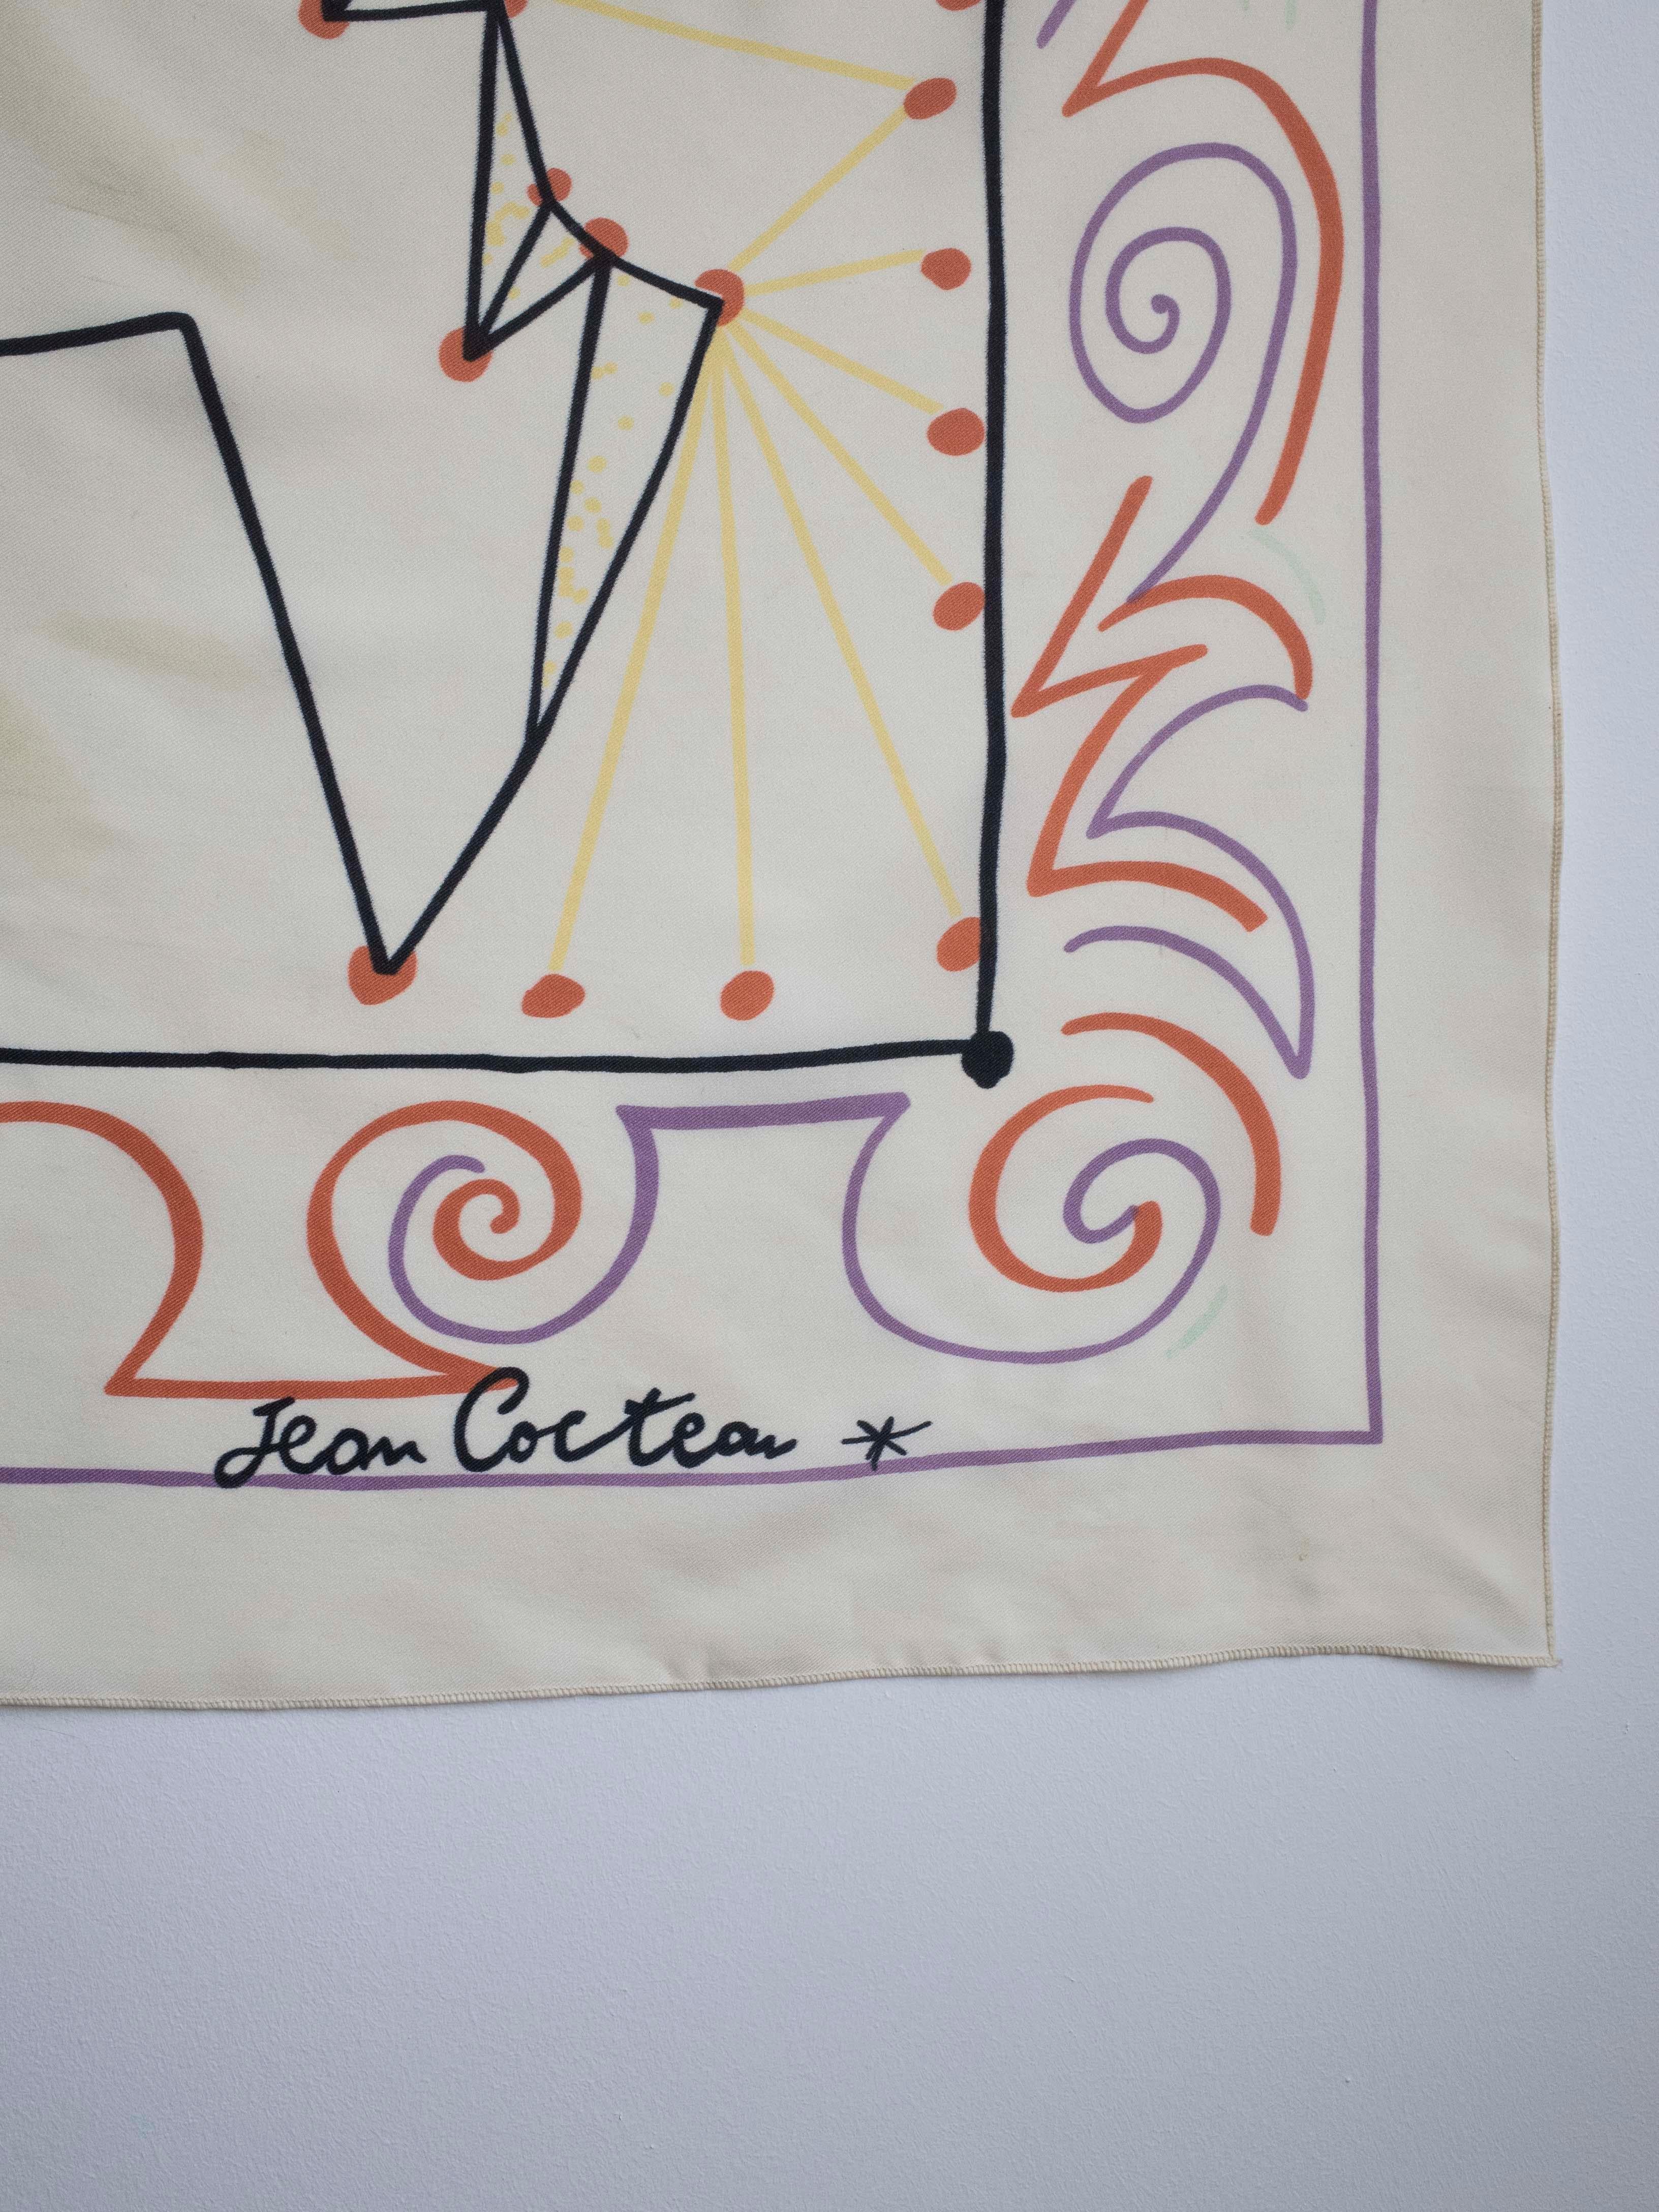 Collectible scarf by the artist Jean Cocteau. Features an abstract profile of a face with dynamic lines and swirls.Labeled.

Measures 29” square,Printed 